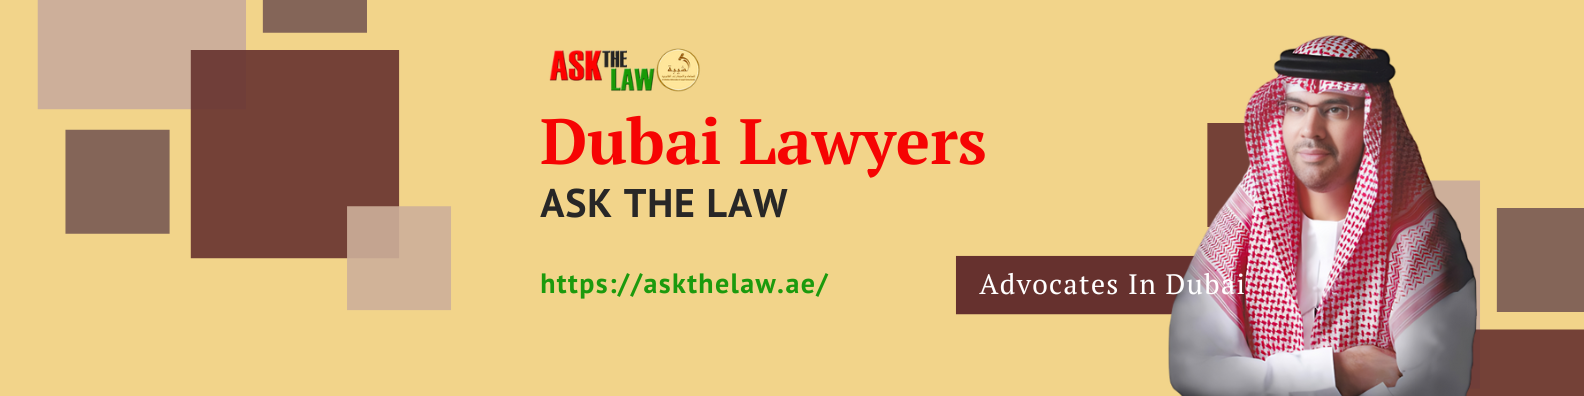 Lawyers in Dubai - ASK THE LAW cover